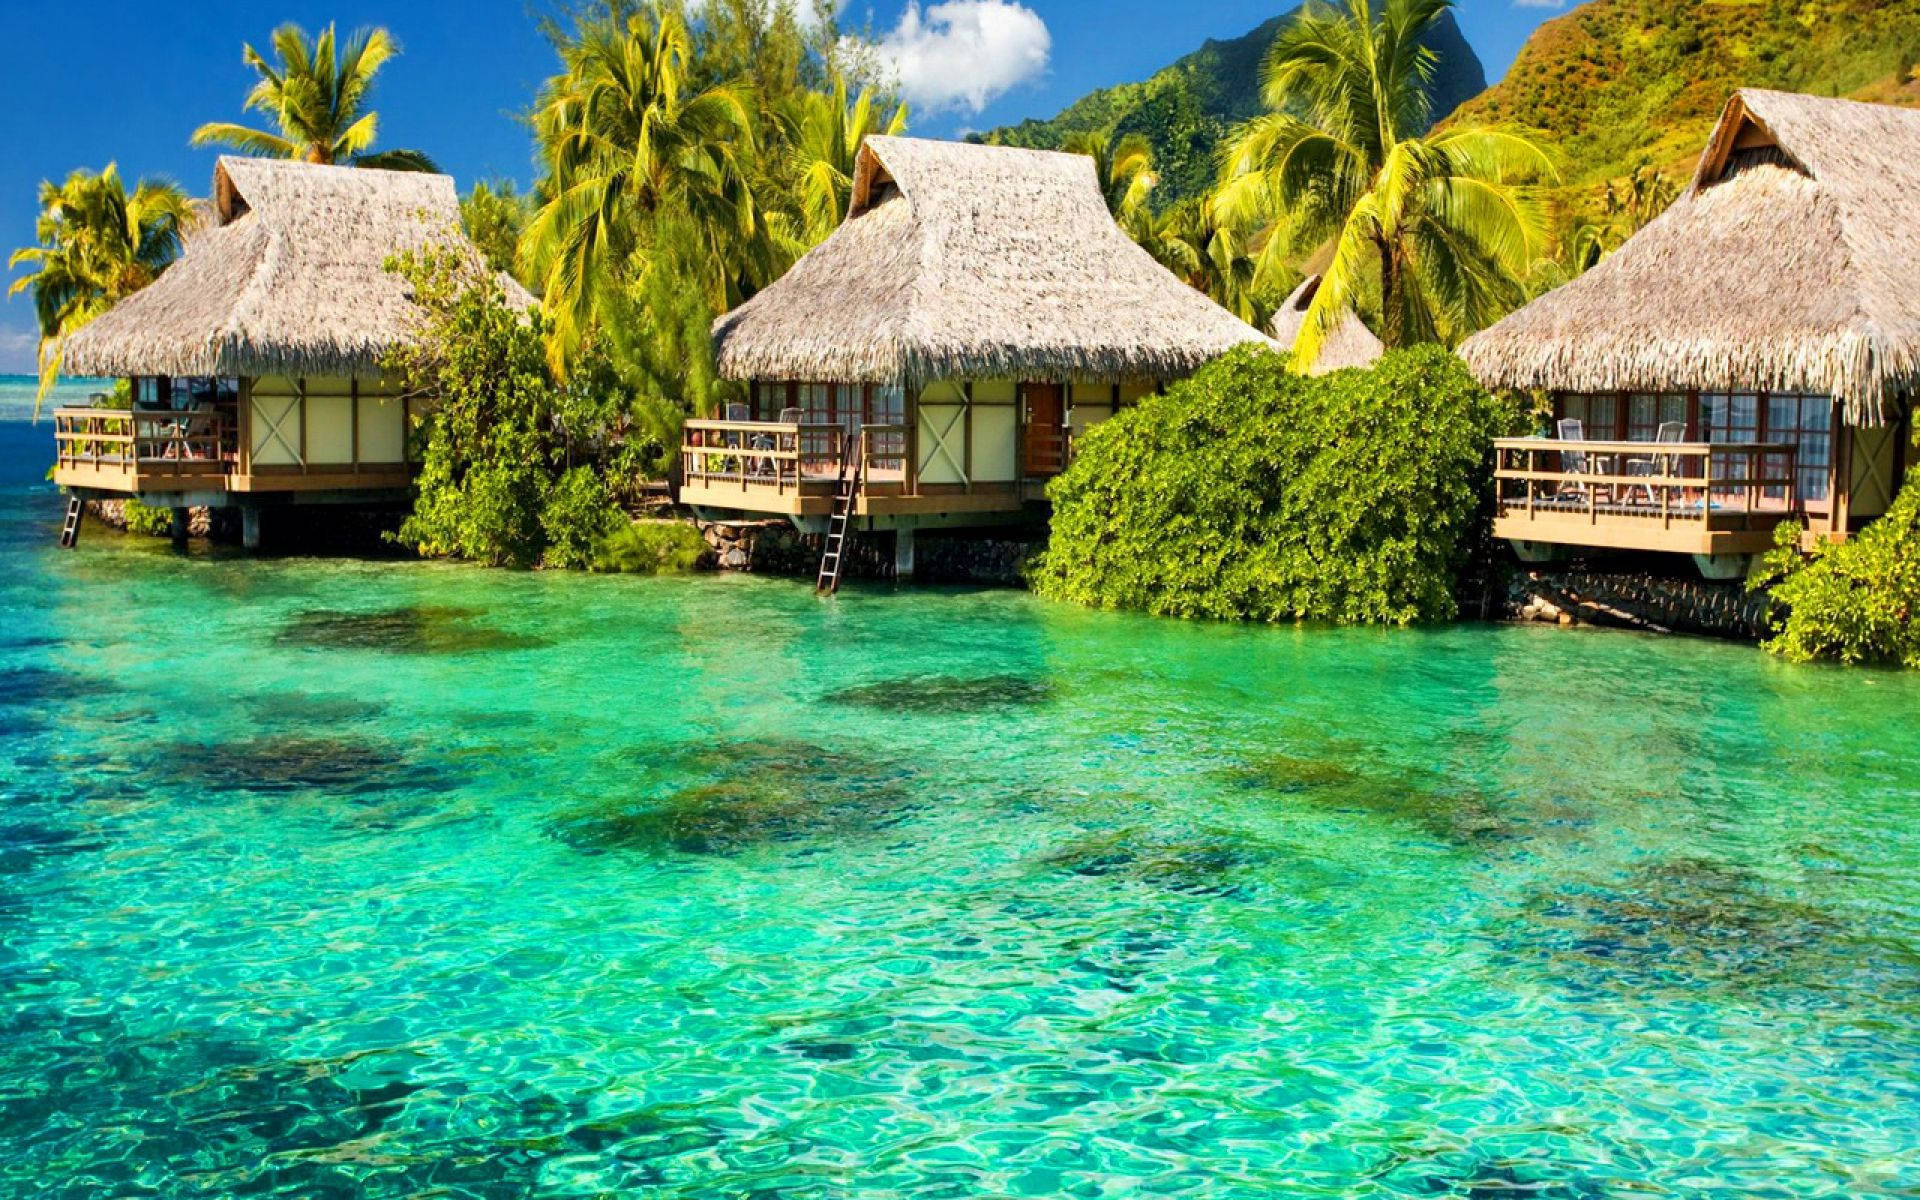 Seaside Cottages In The Philippines Wallpaper